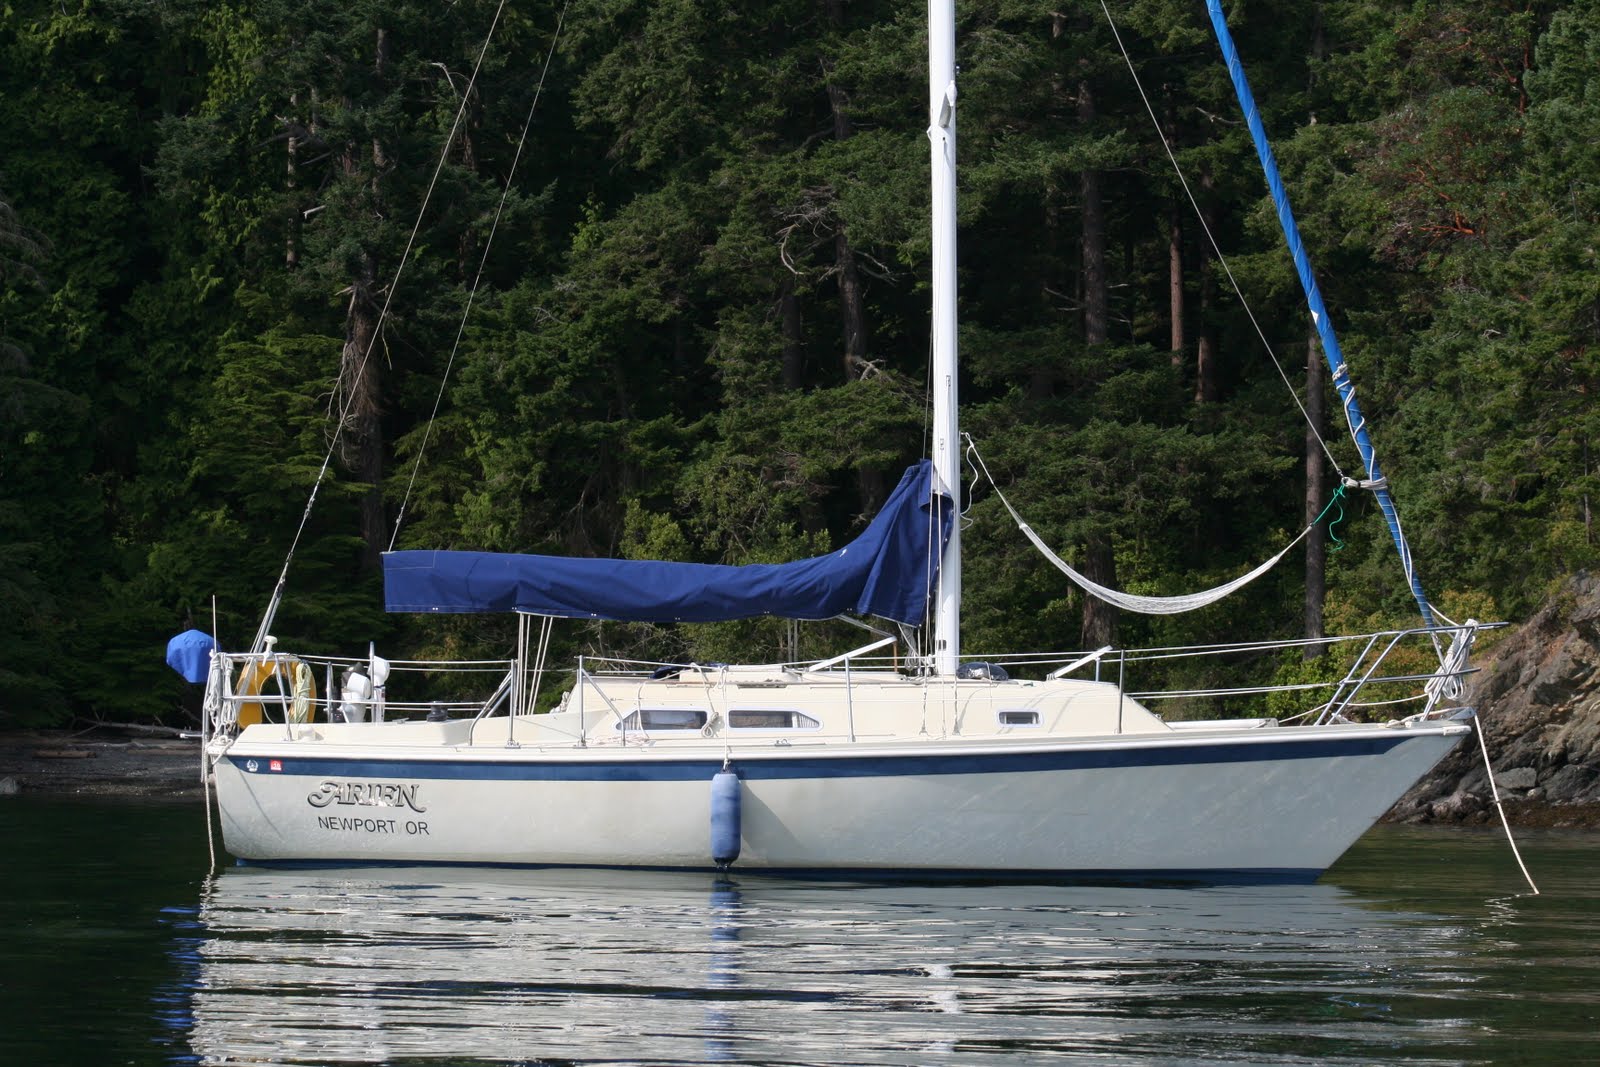 Arien is our 1983 model Ericson 30 +, tall rig sail boat.